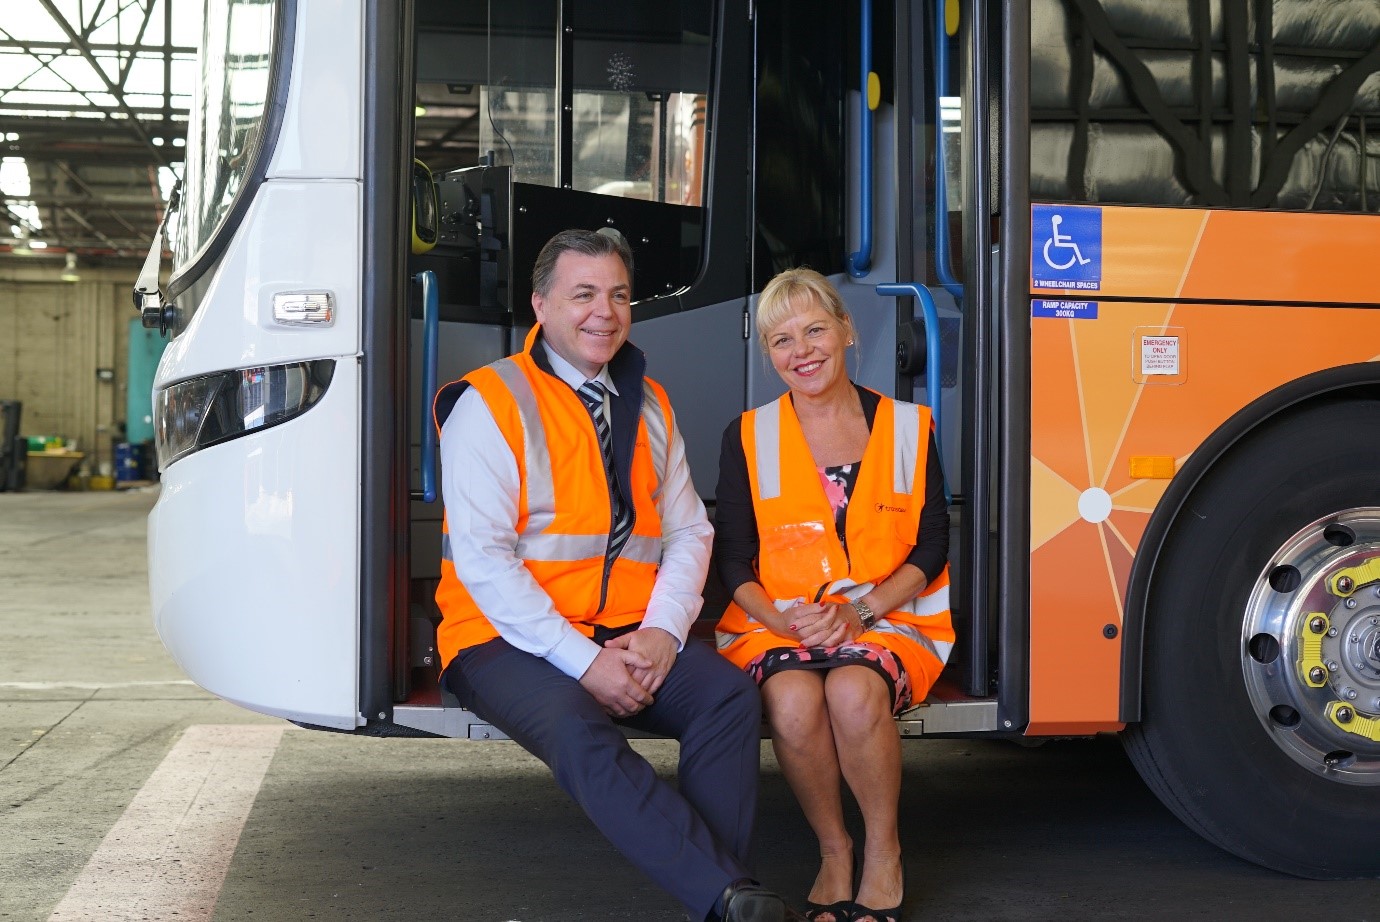 Mayor and Transdev manager sitting on steps of new electric bus